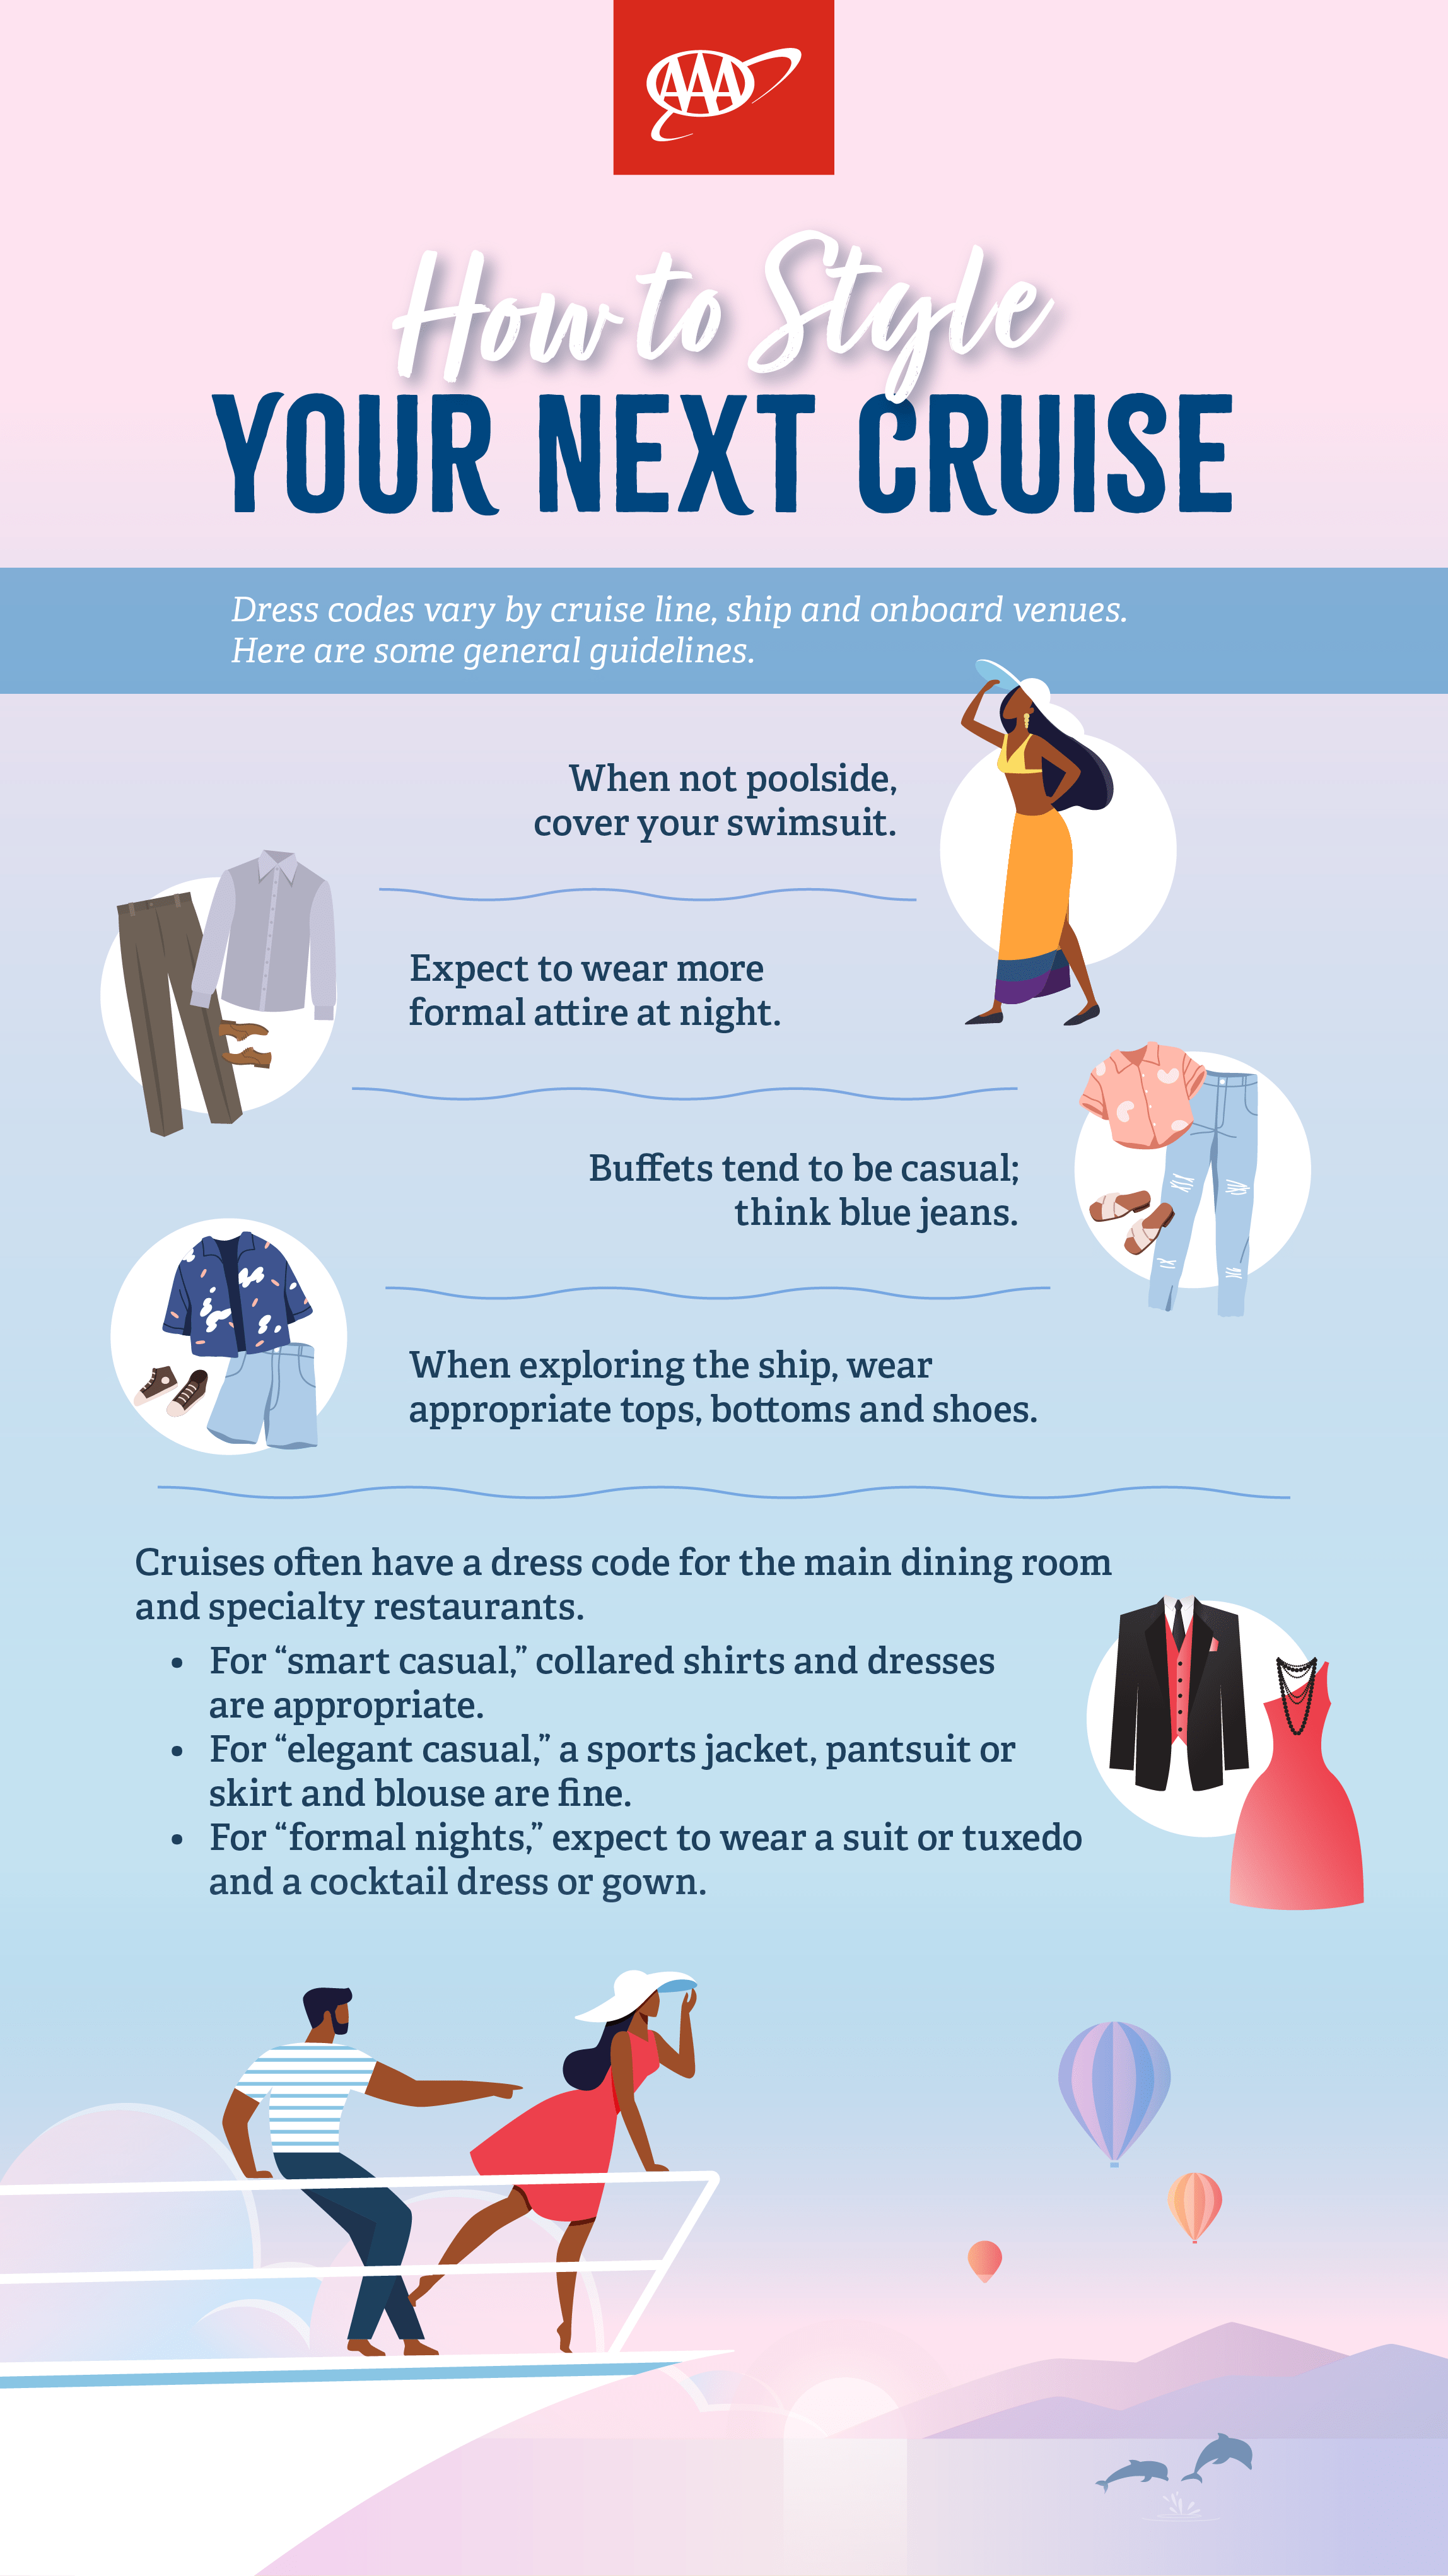 AAA infographic on cruise line dress codes